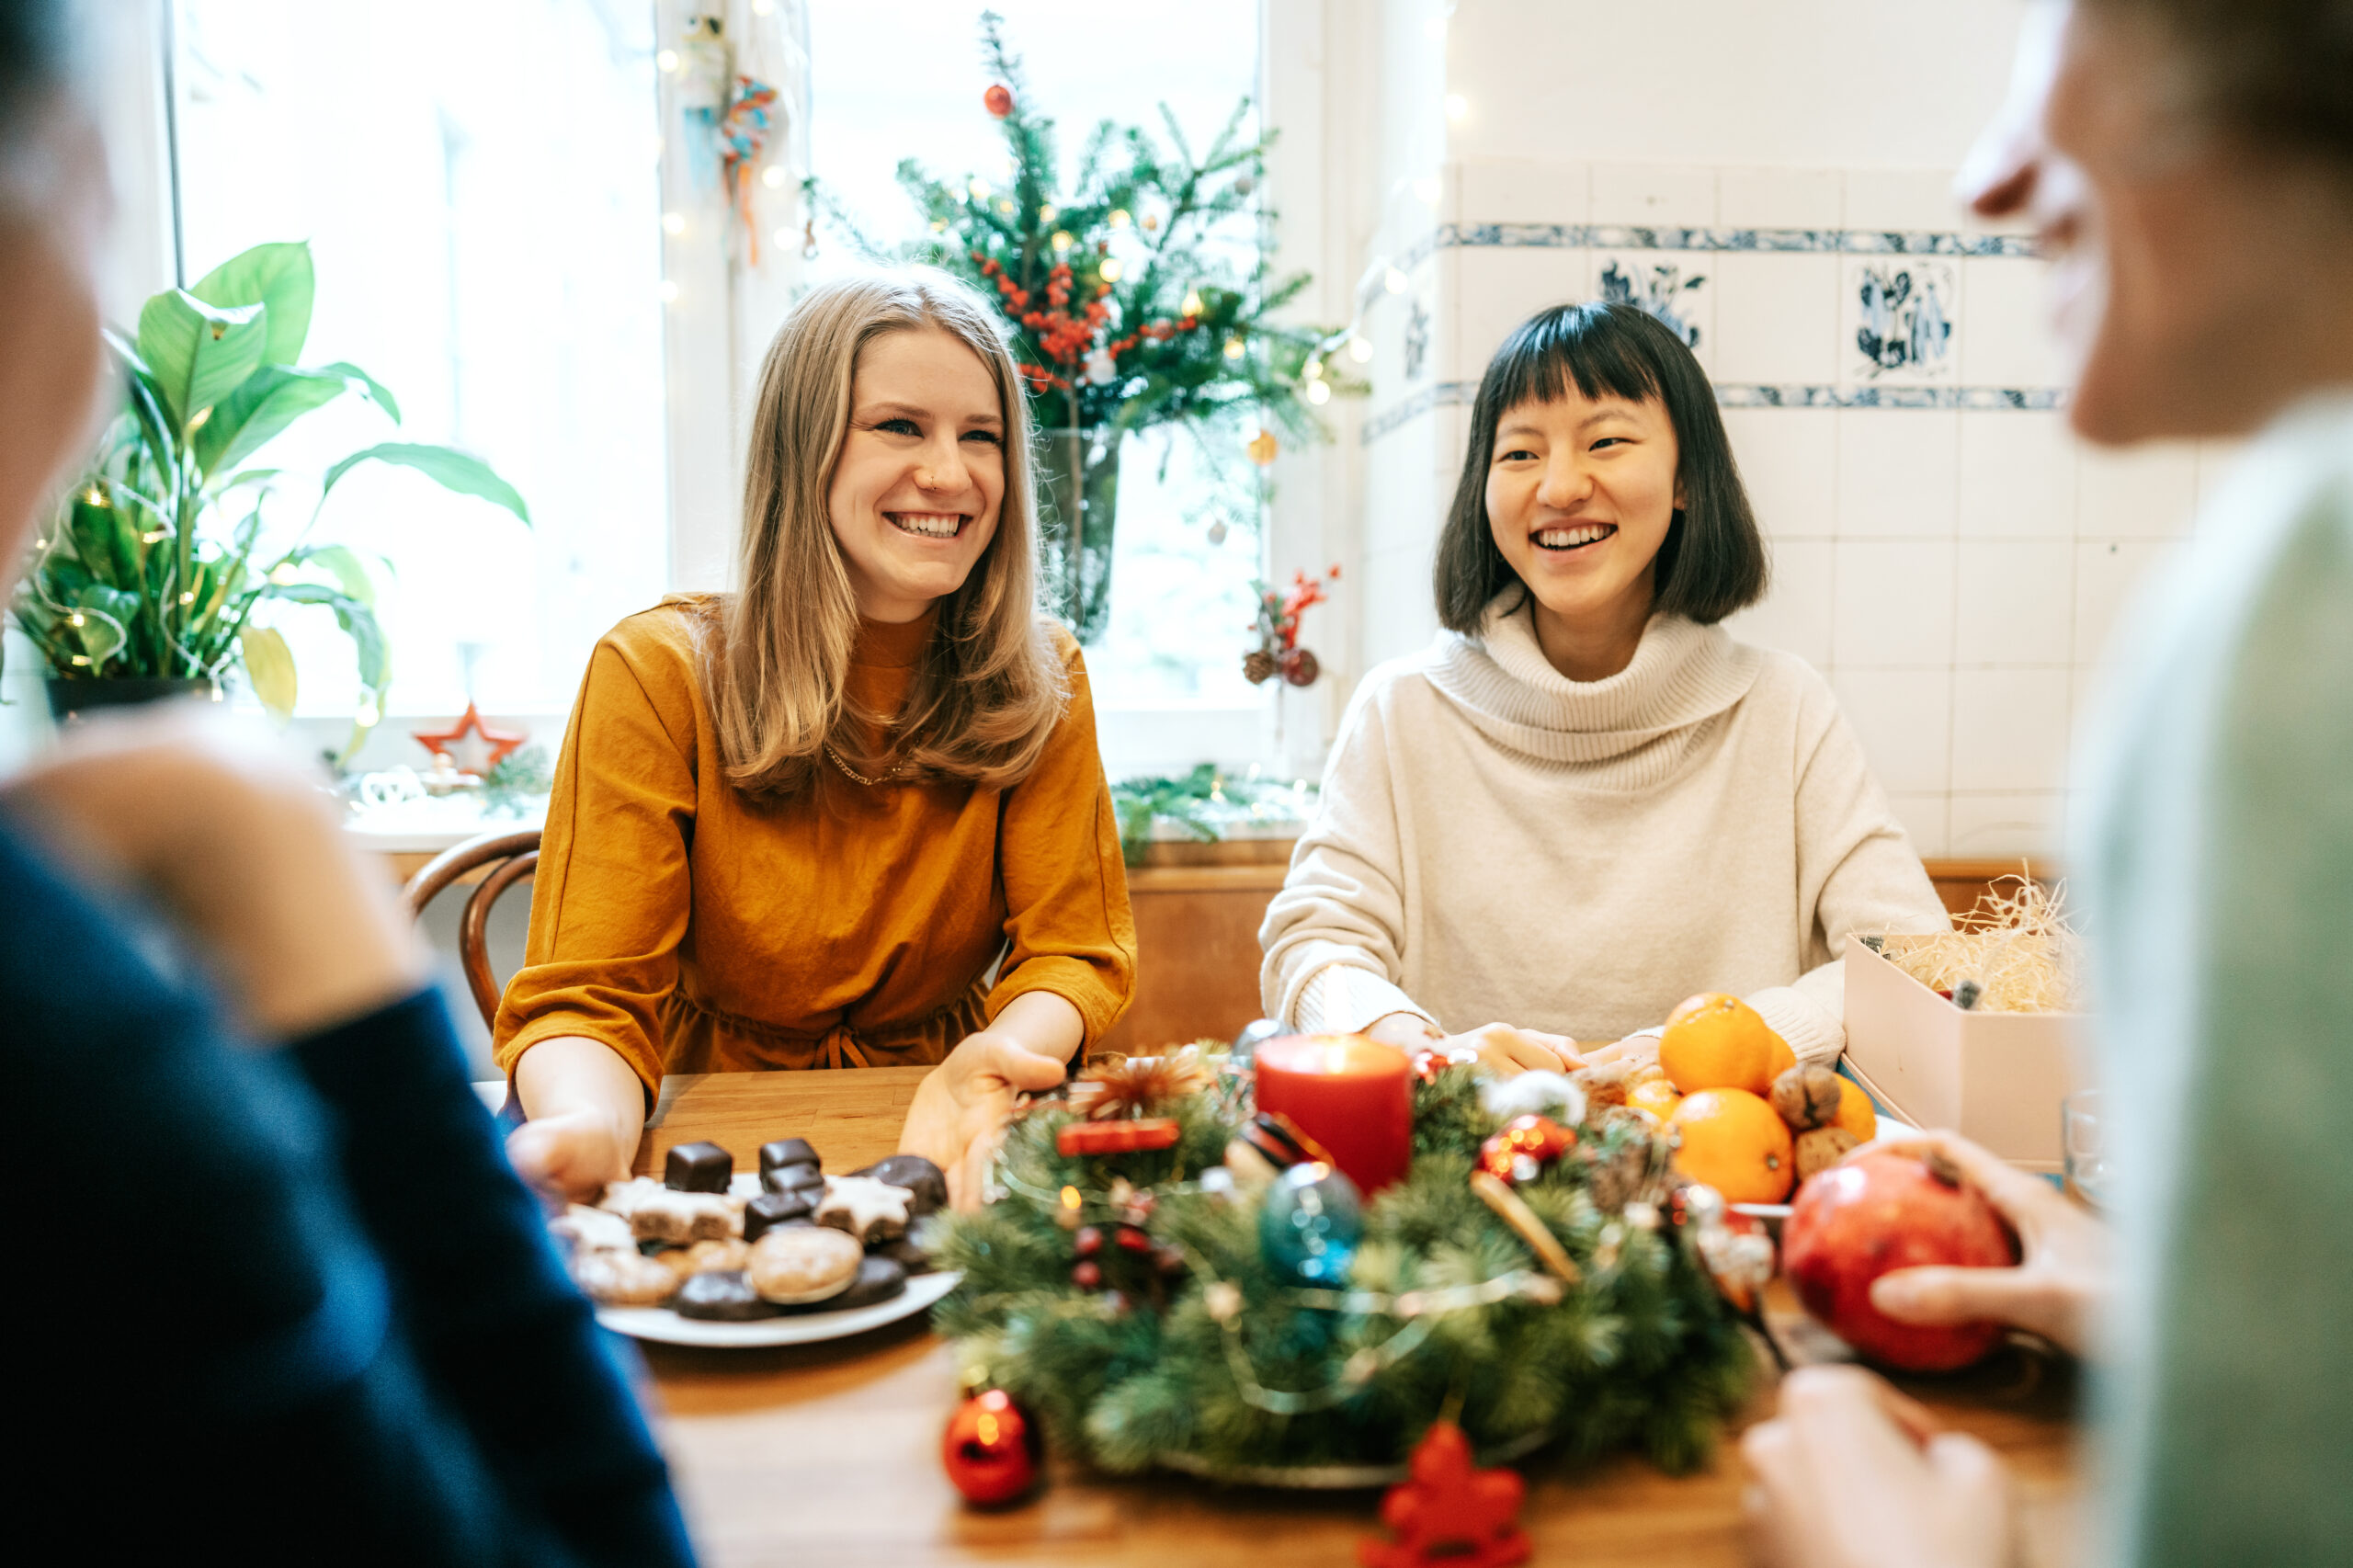 Group of women having food while sitting at festive table during Christmas. Multi-ethnic group of female having Christmas meal together at home.